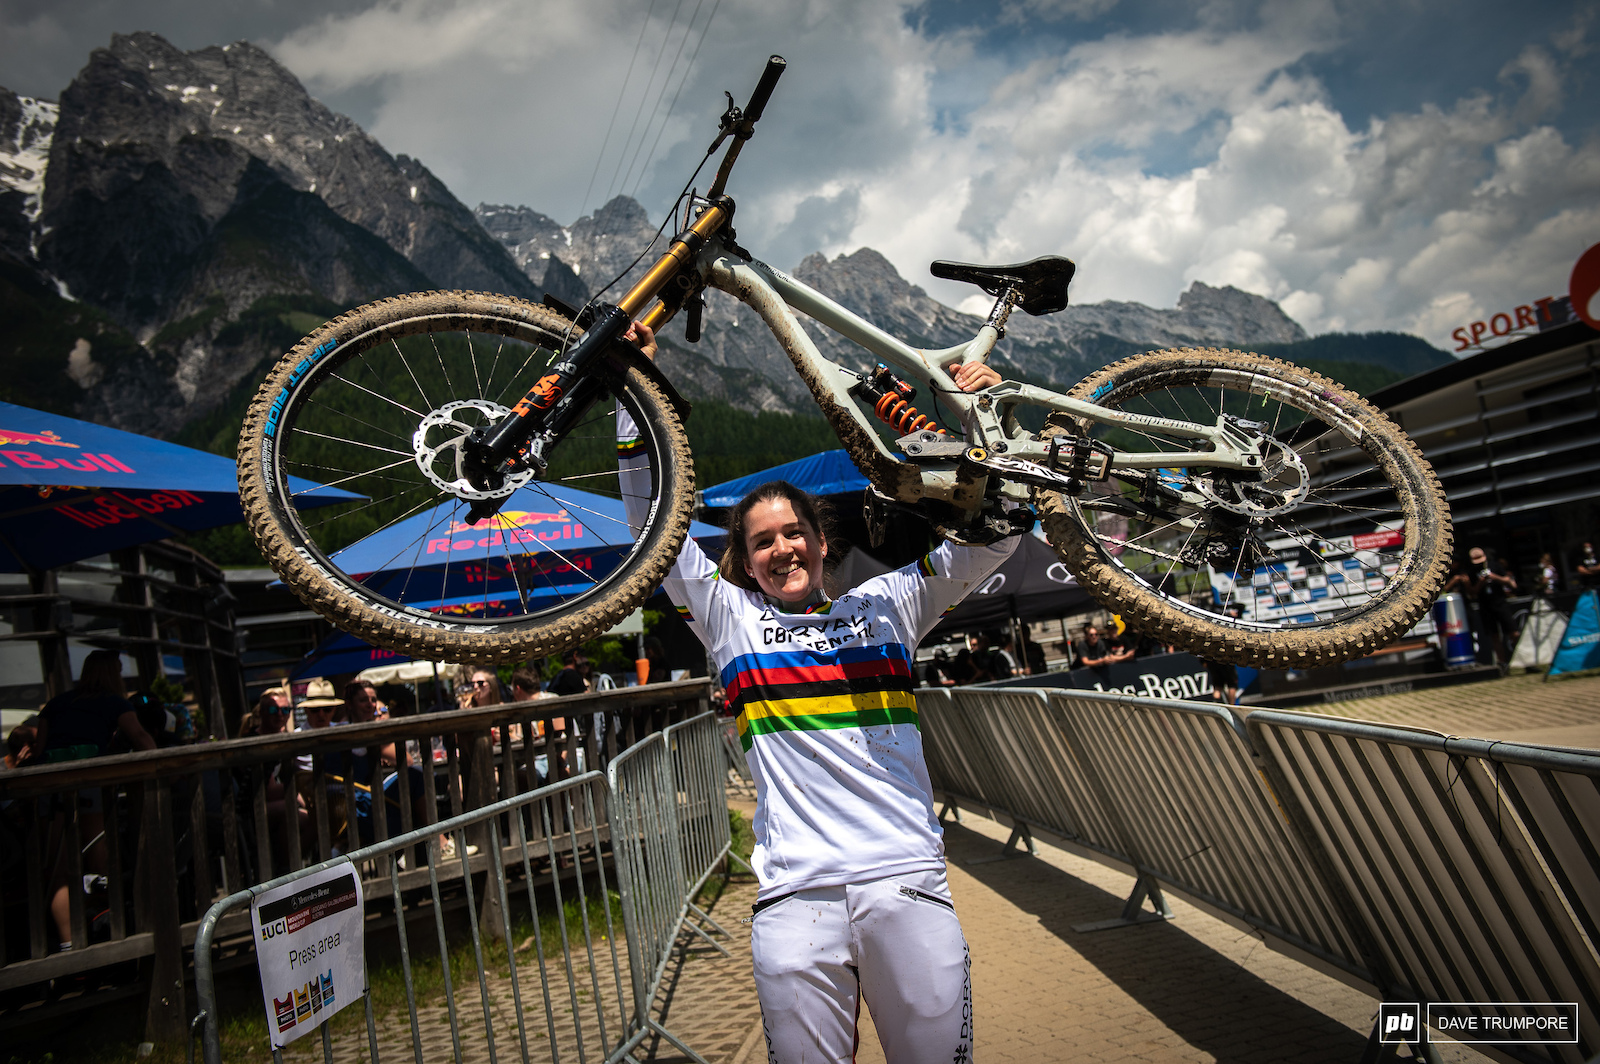 Two wins in a row at Leogang for Camille Balanche